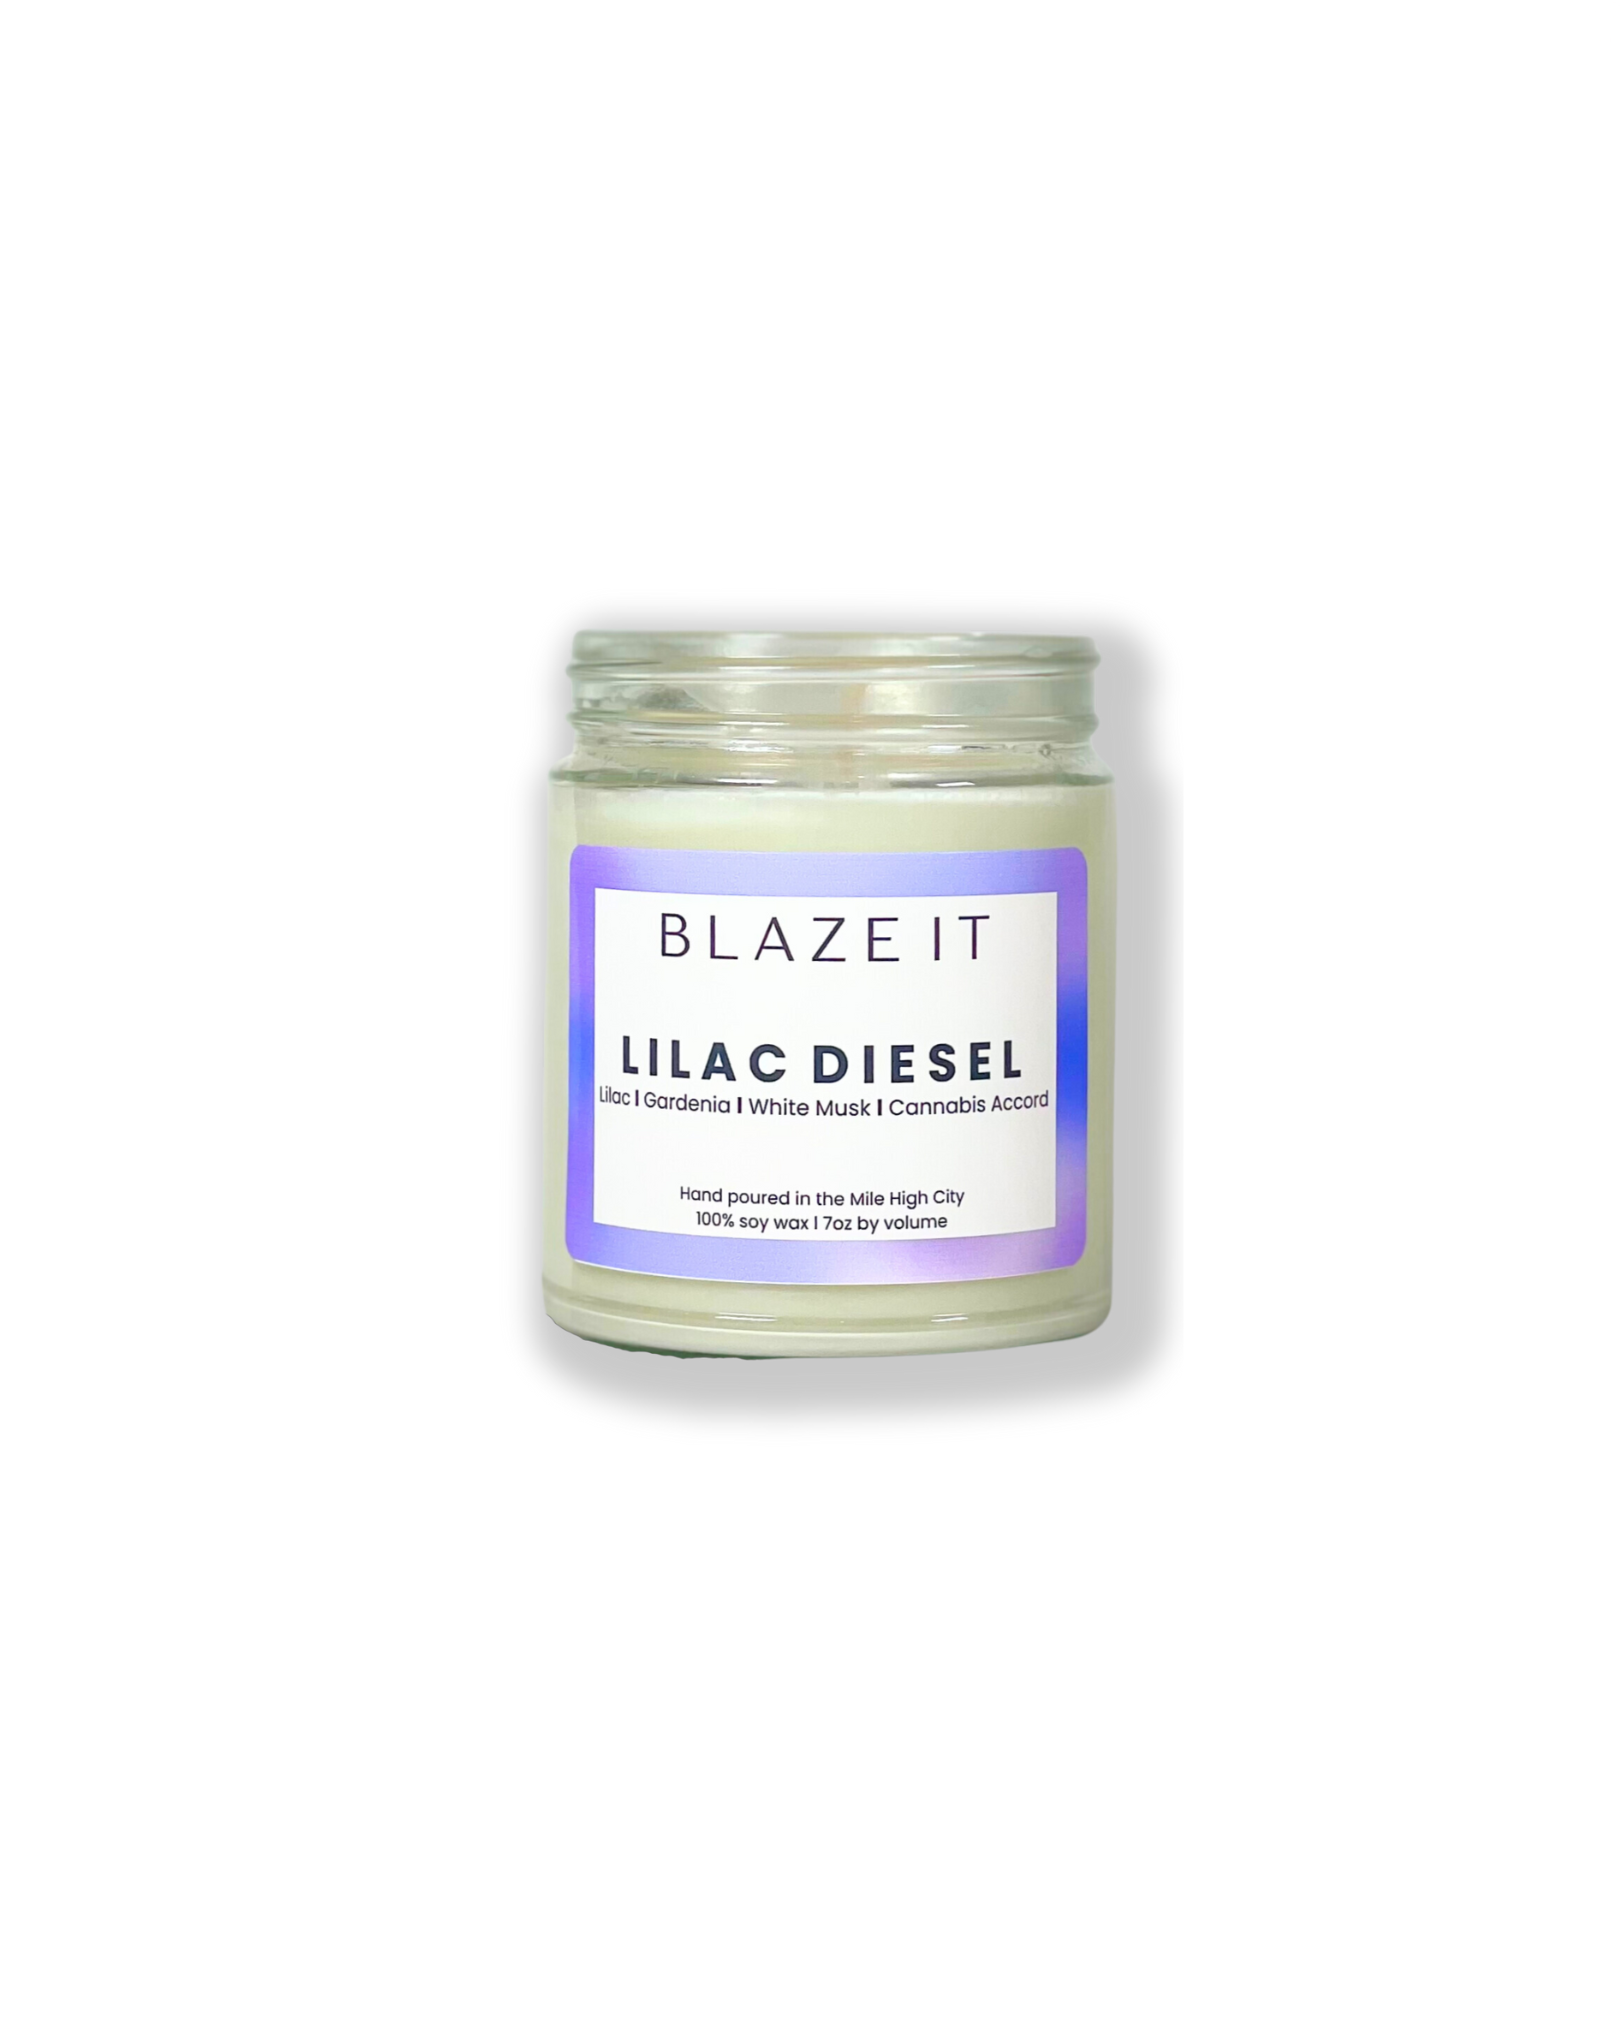 Lilac Diesel soy candle - Blaze It Candle Co